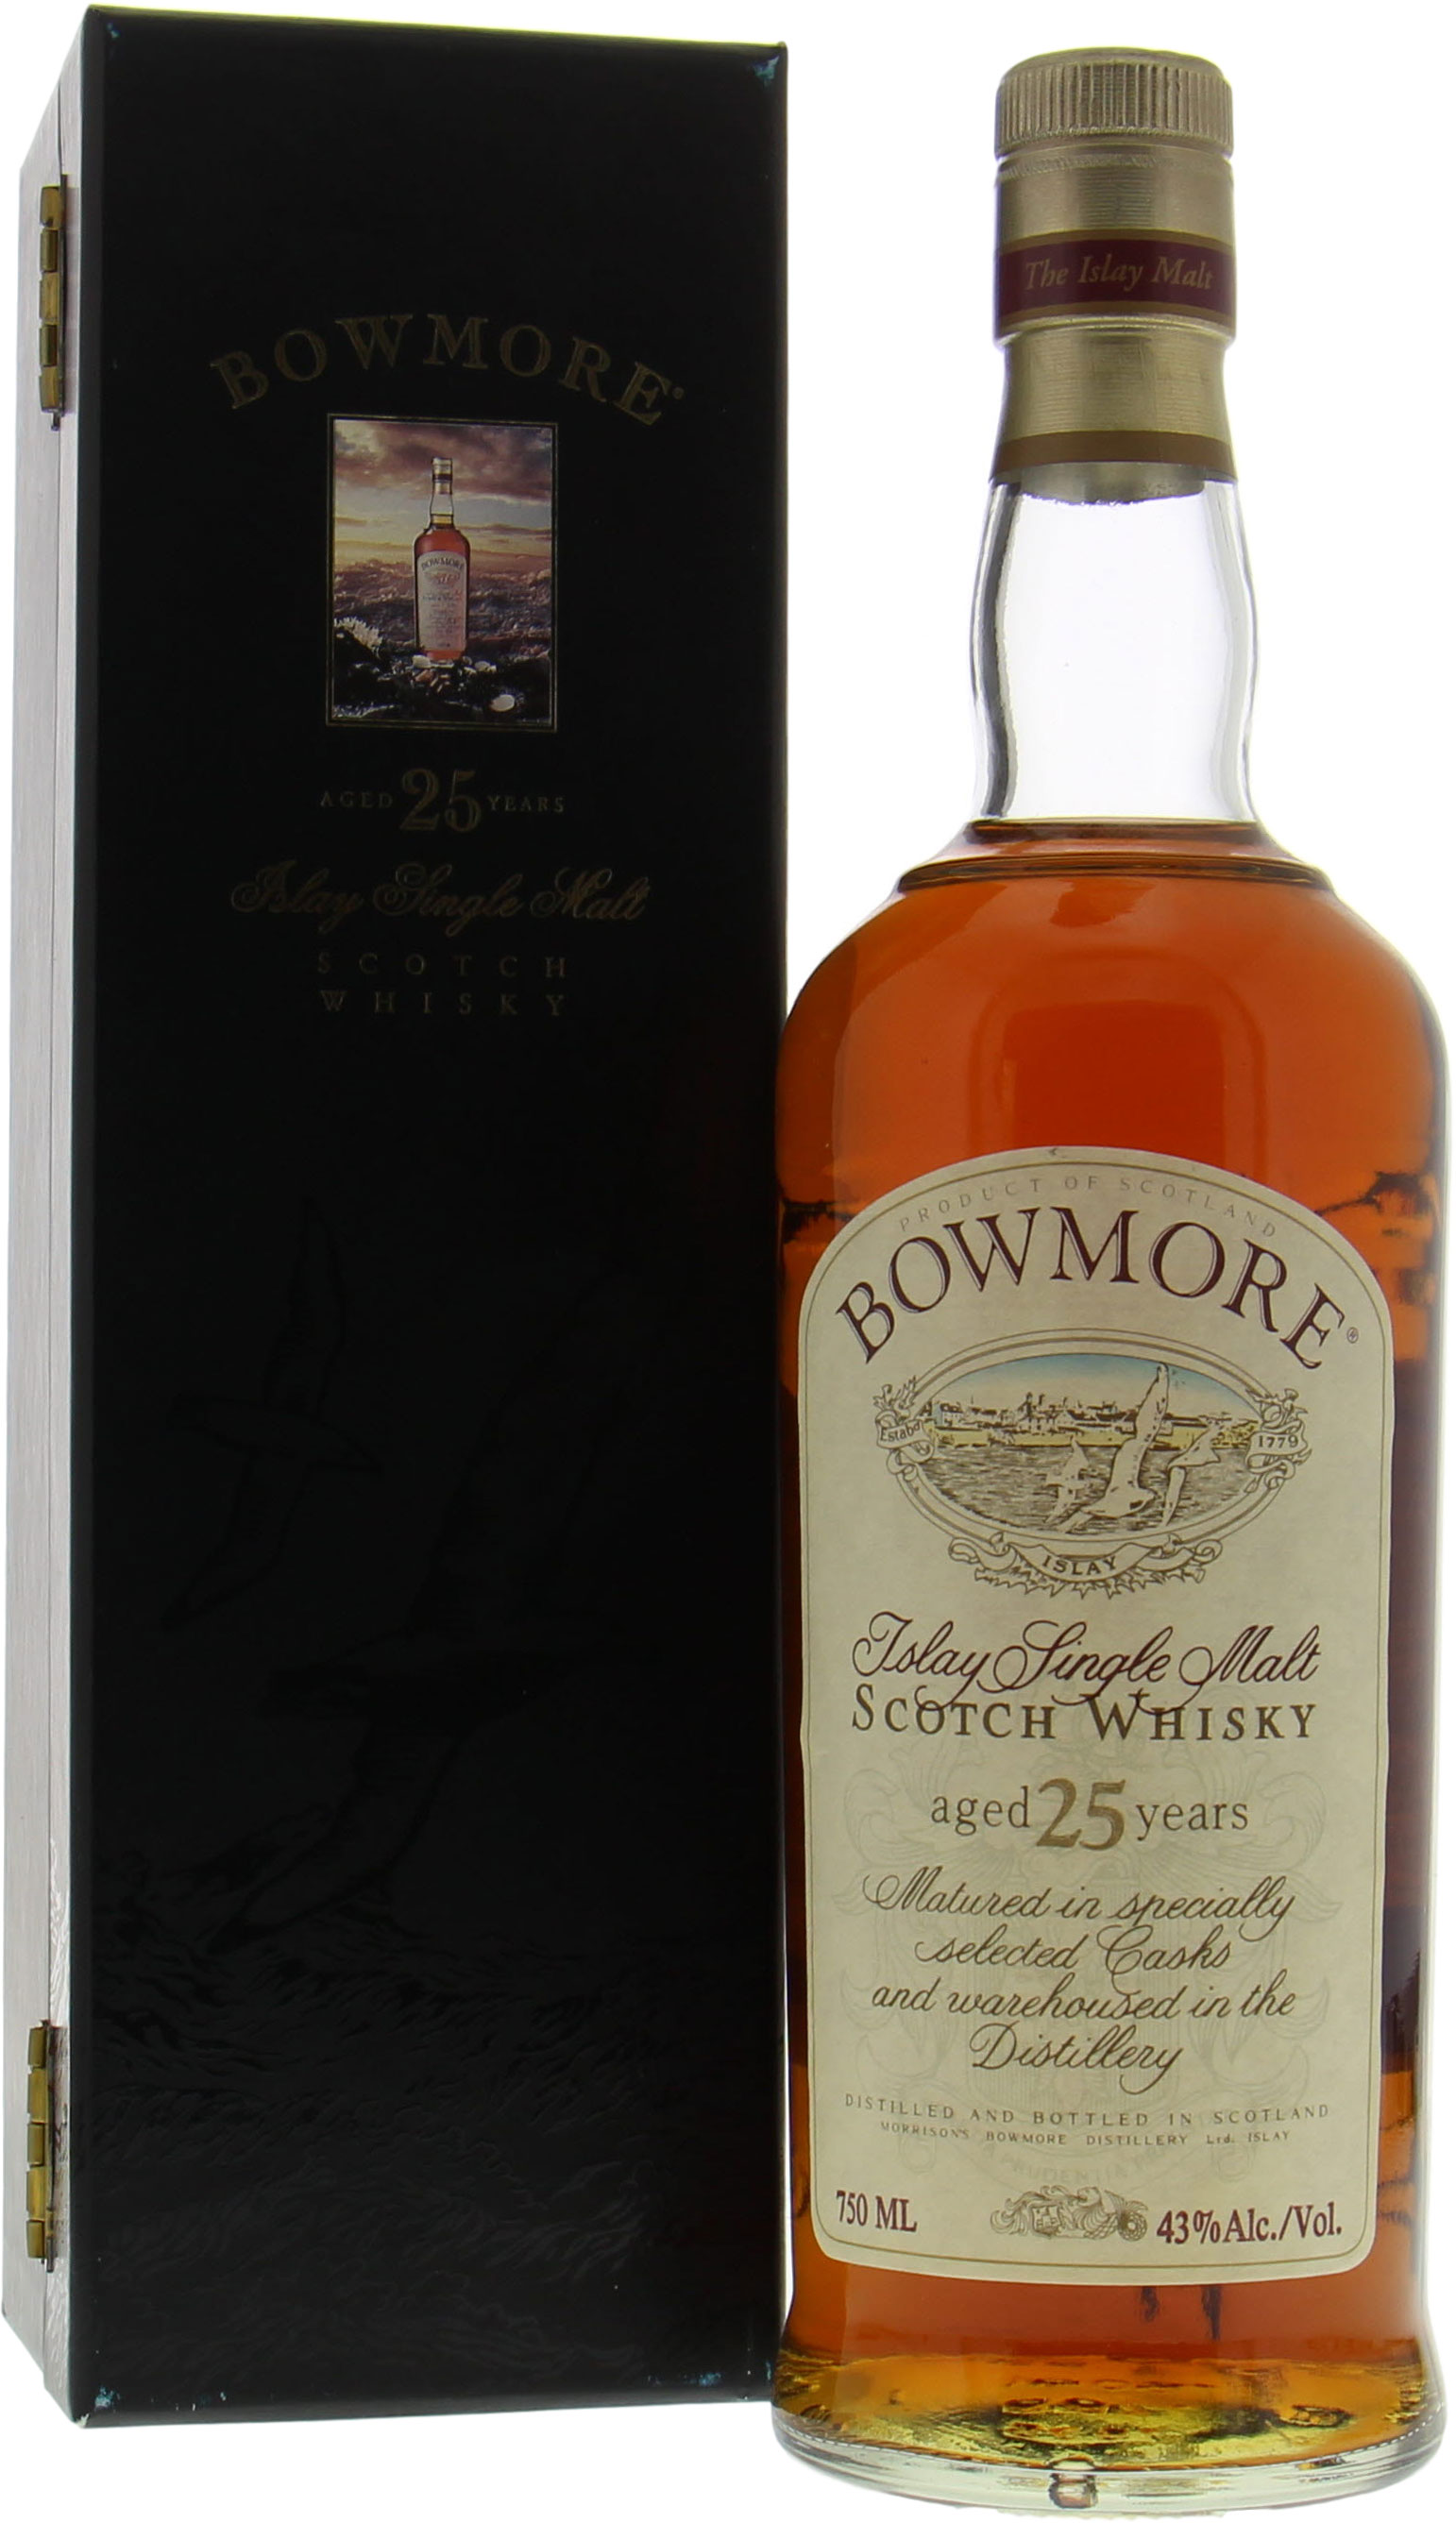 Bowmore - 25 years Old Seagulls Old label 43% NV